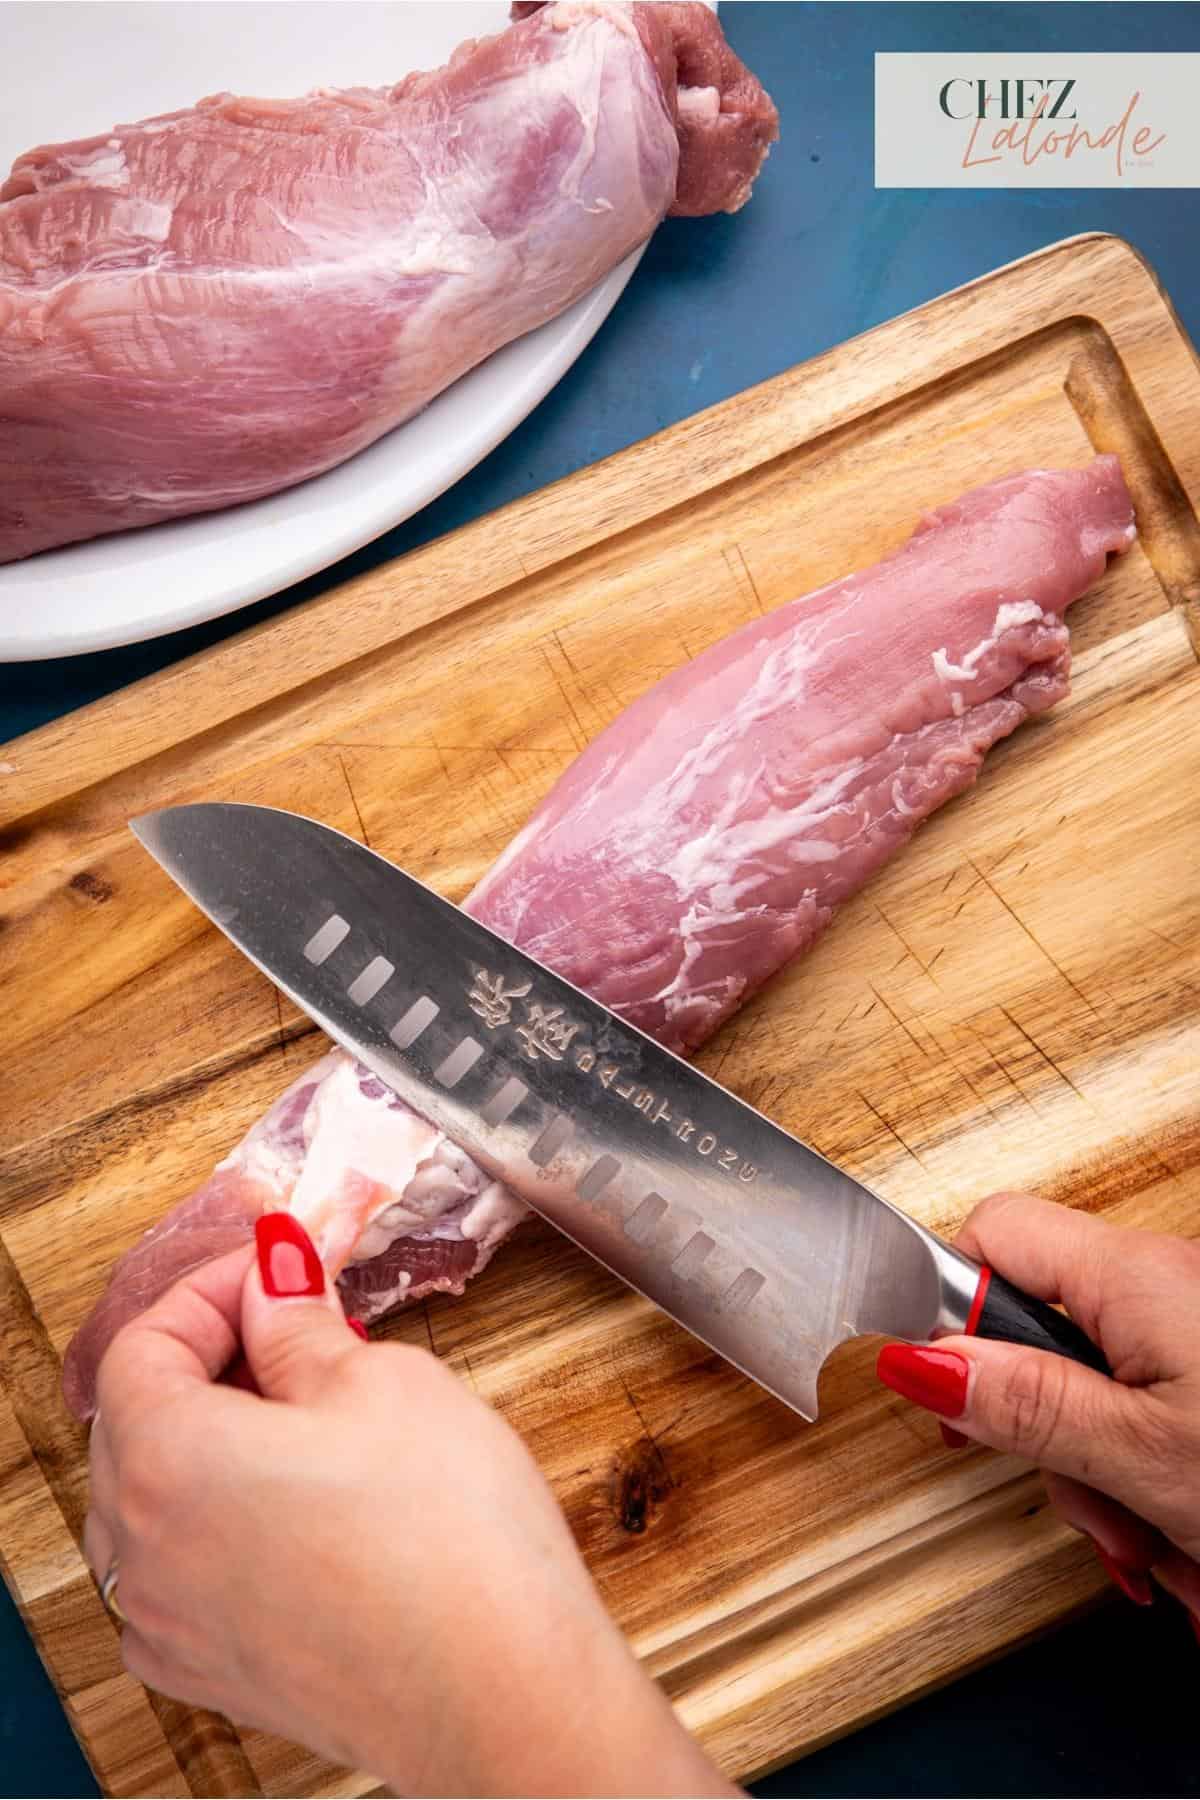 Using a knife to carefully trim off the silver lining on the tenderloin.